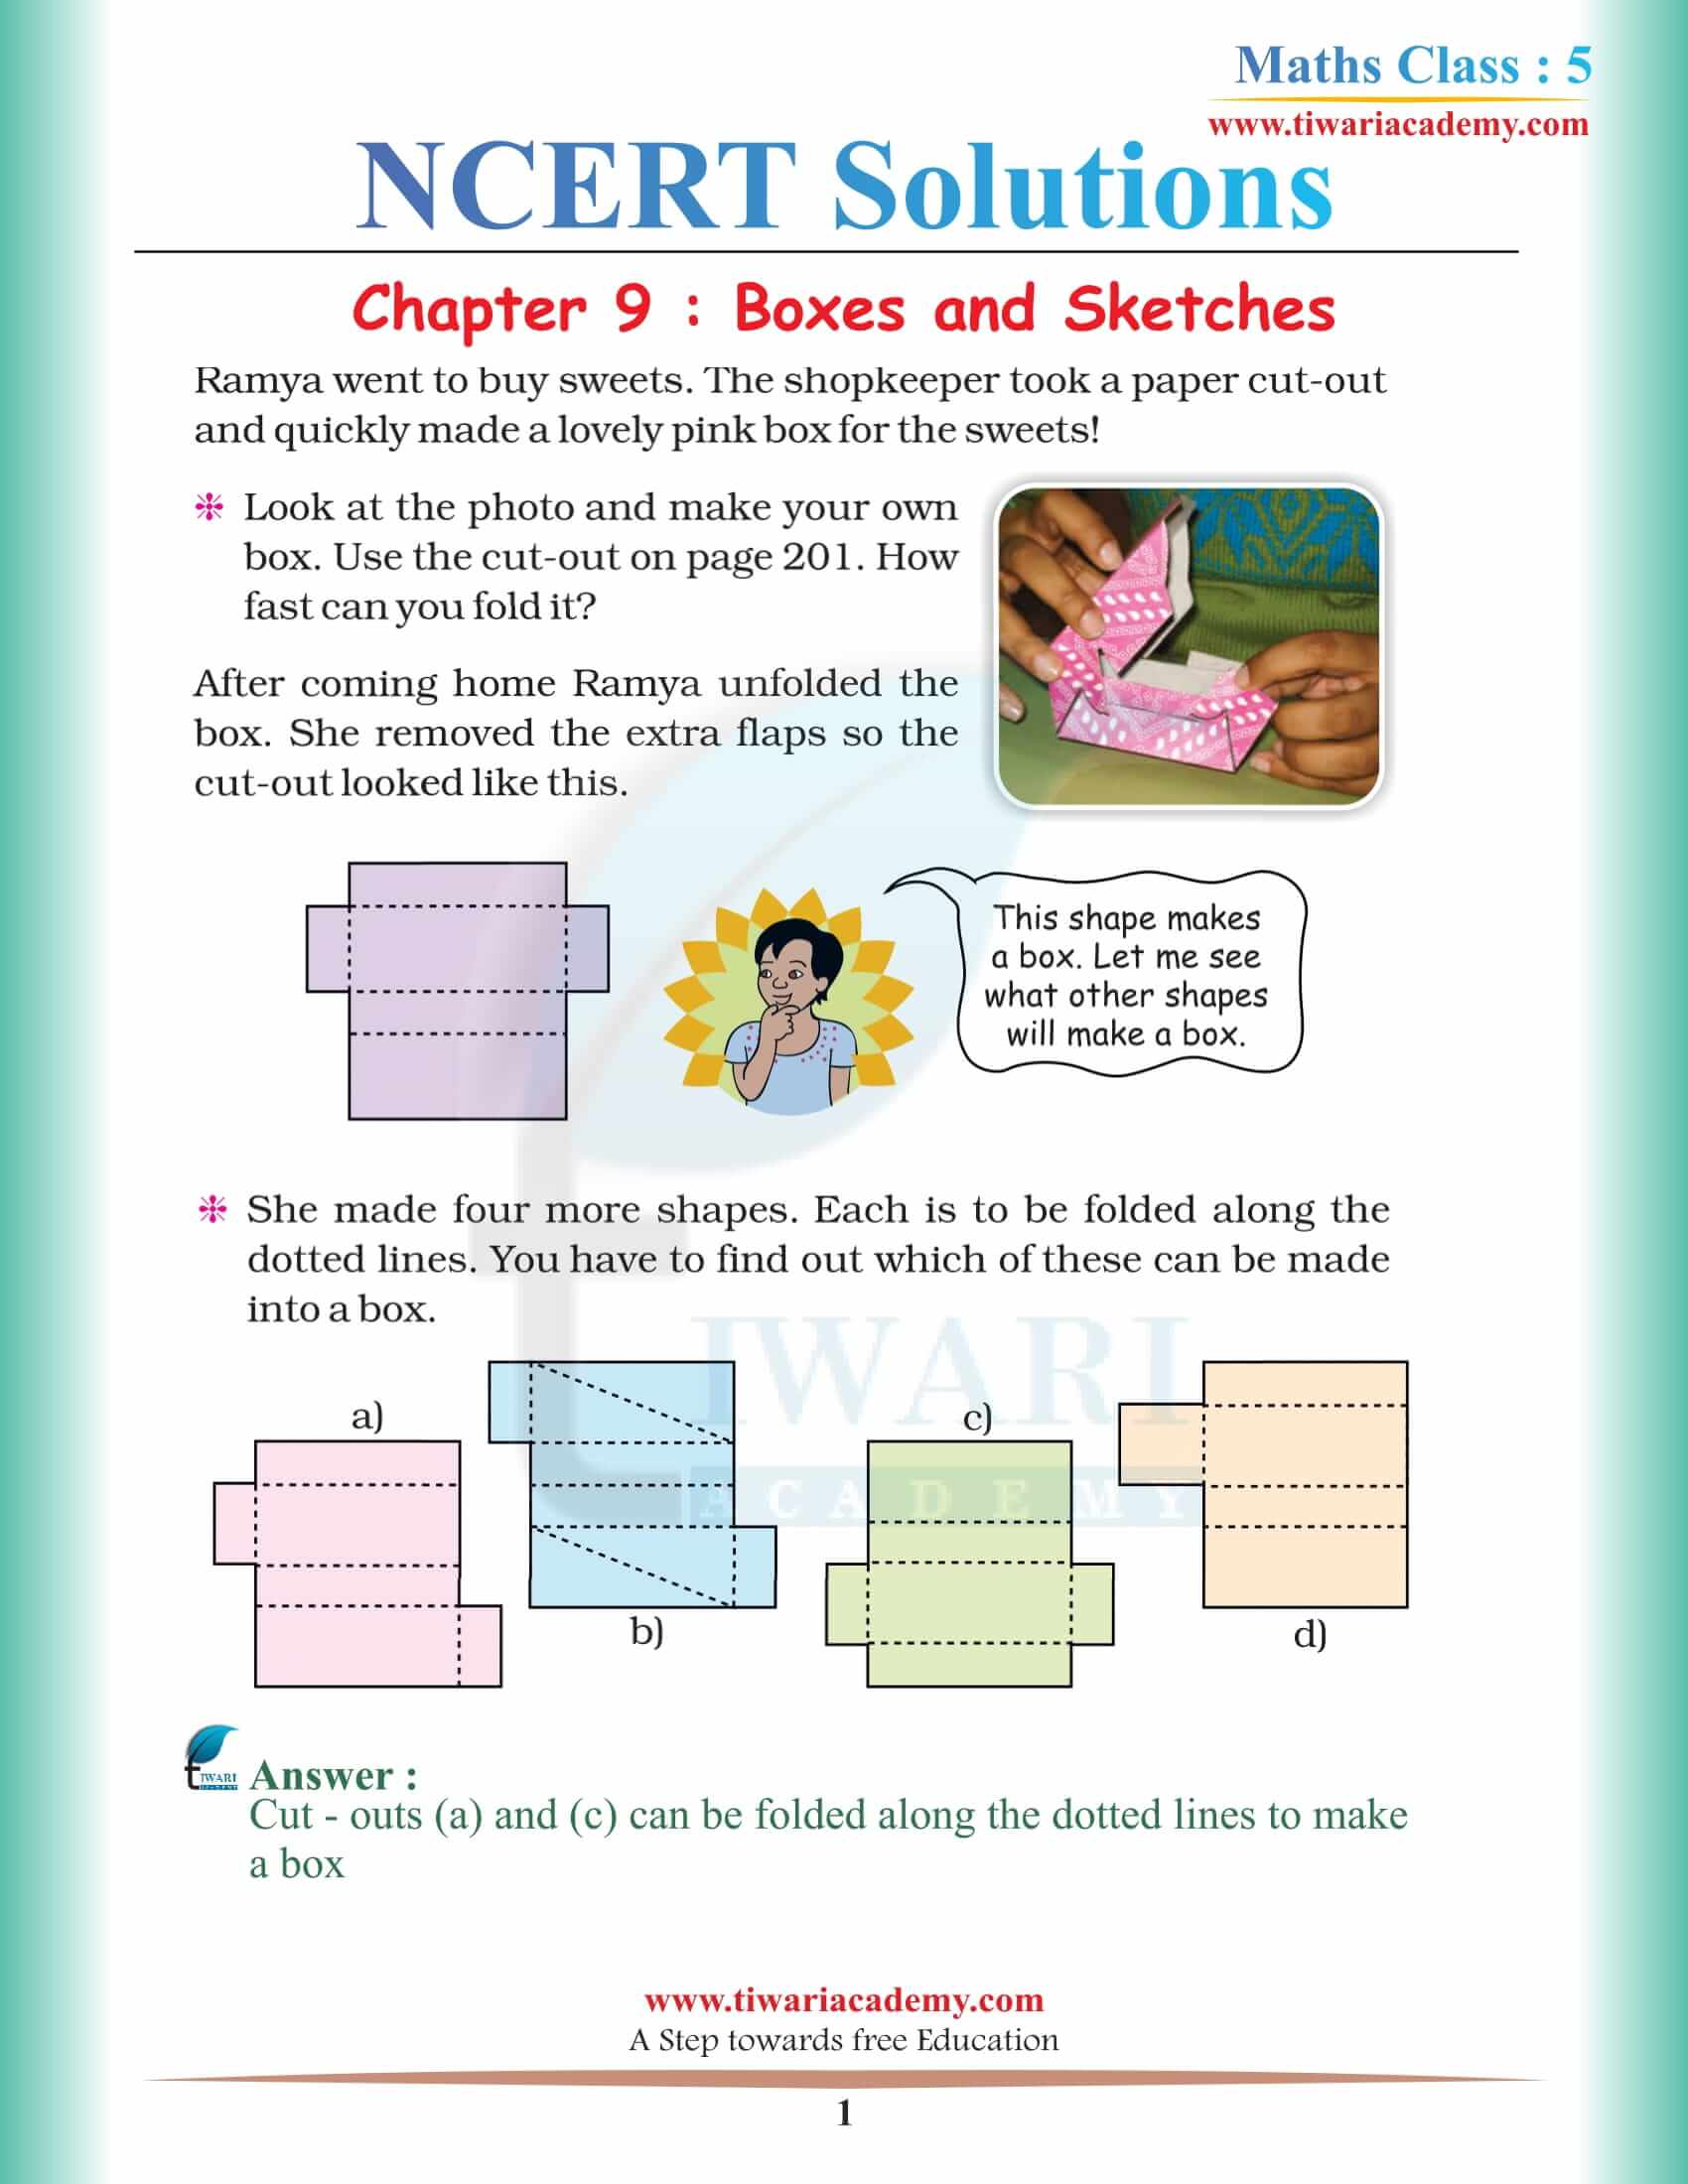 NCERT Solutions for Class 5 Maths Chapter 9 Boxes and Sketches